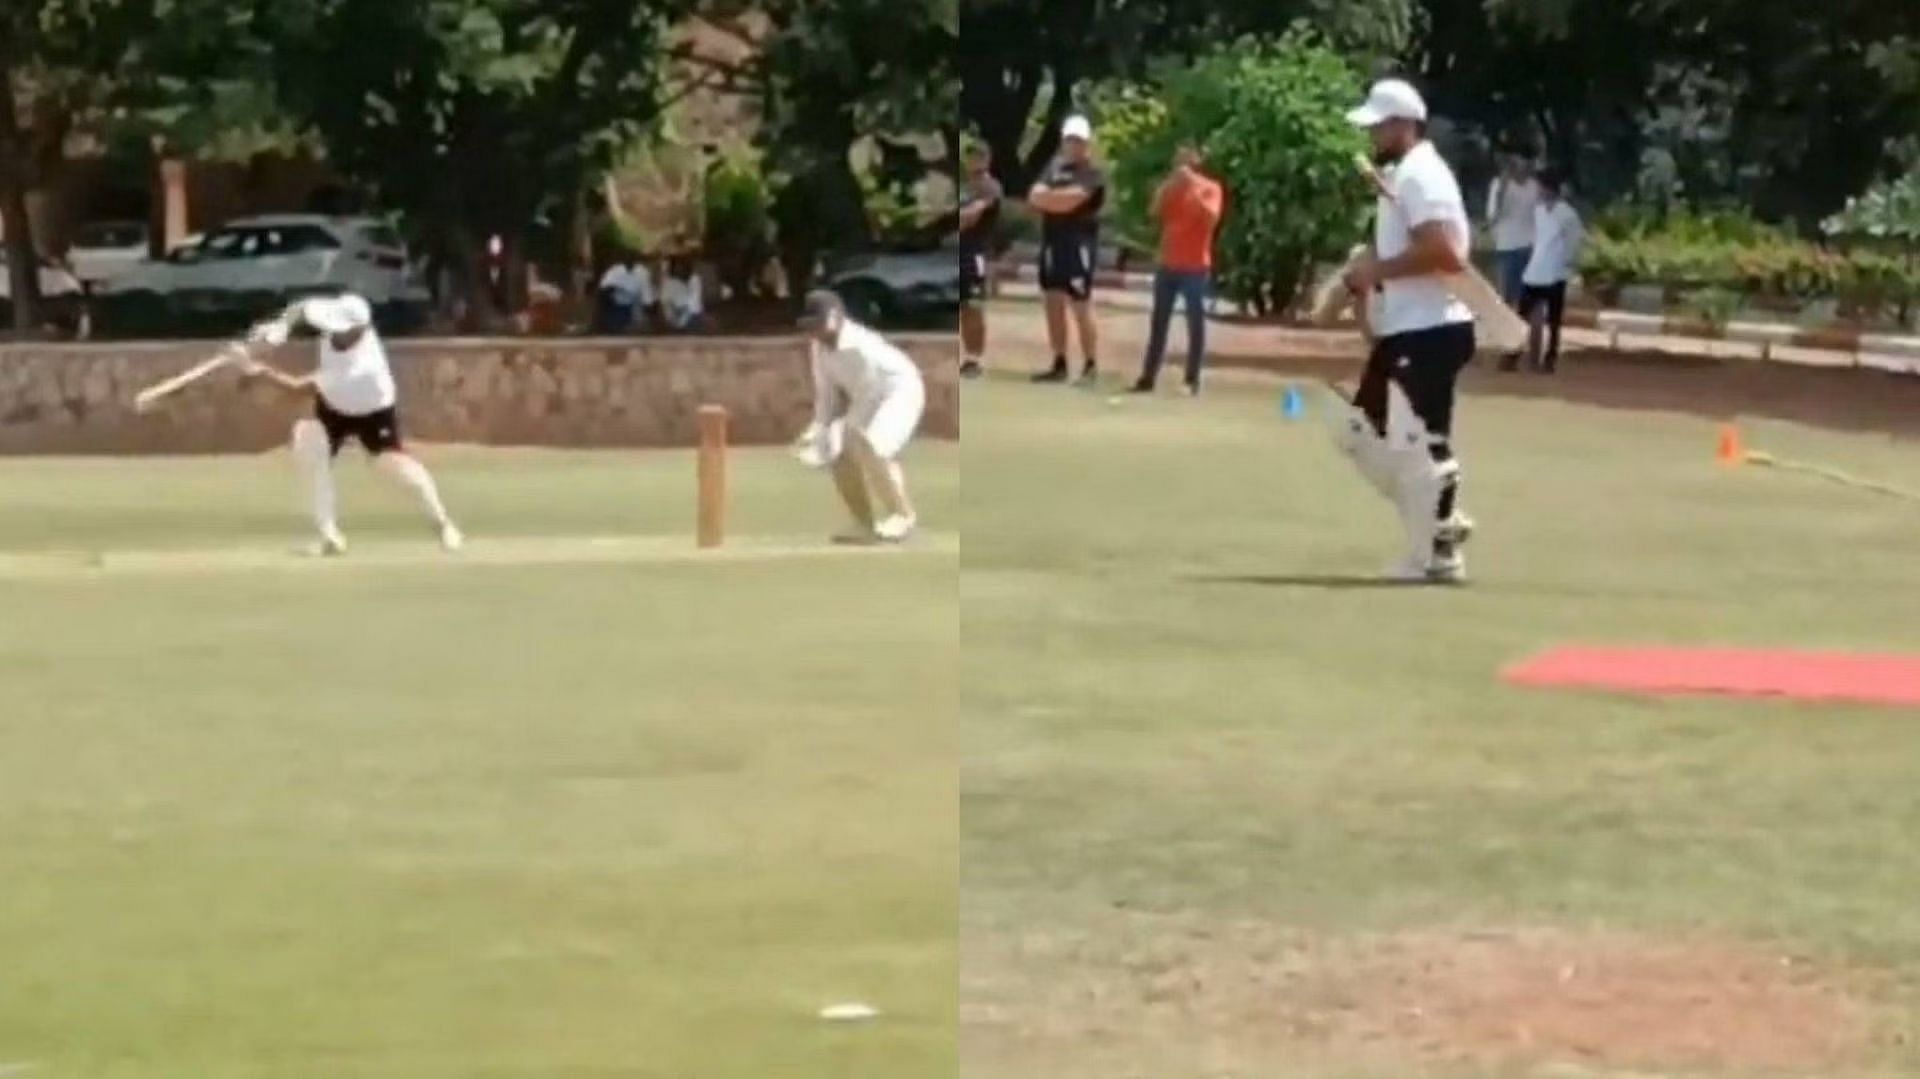 Rishabh Pant was recently seen having a hit in the middle. [P/C: Twitter]